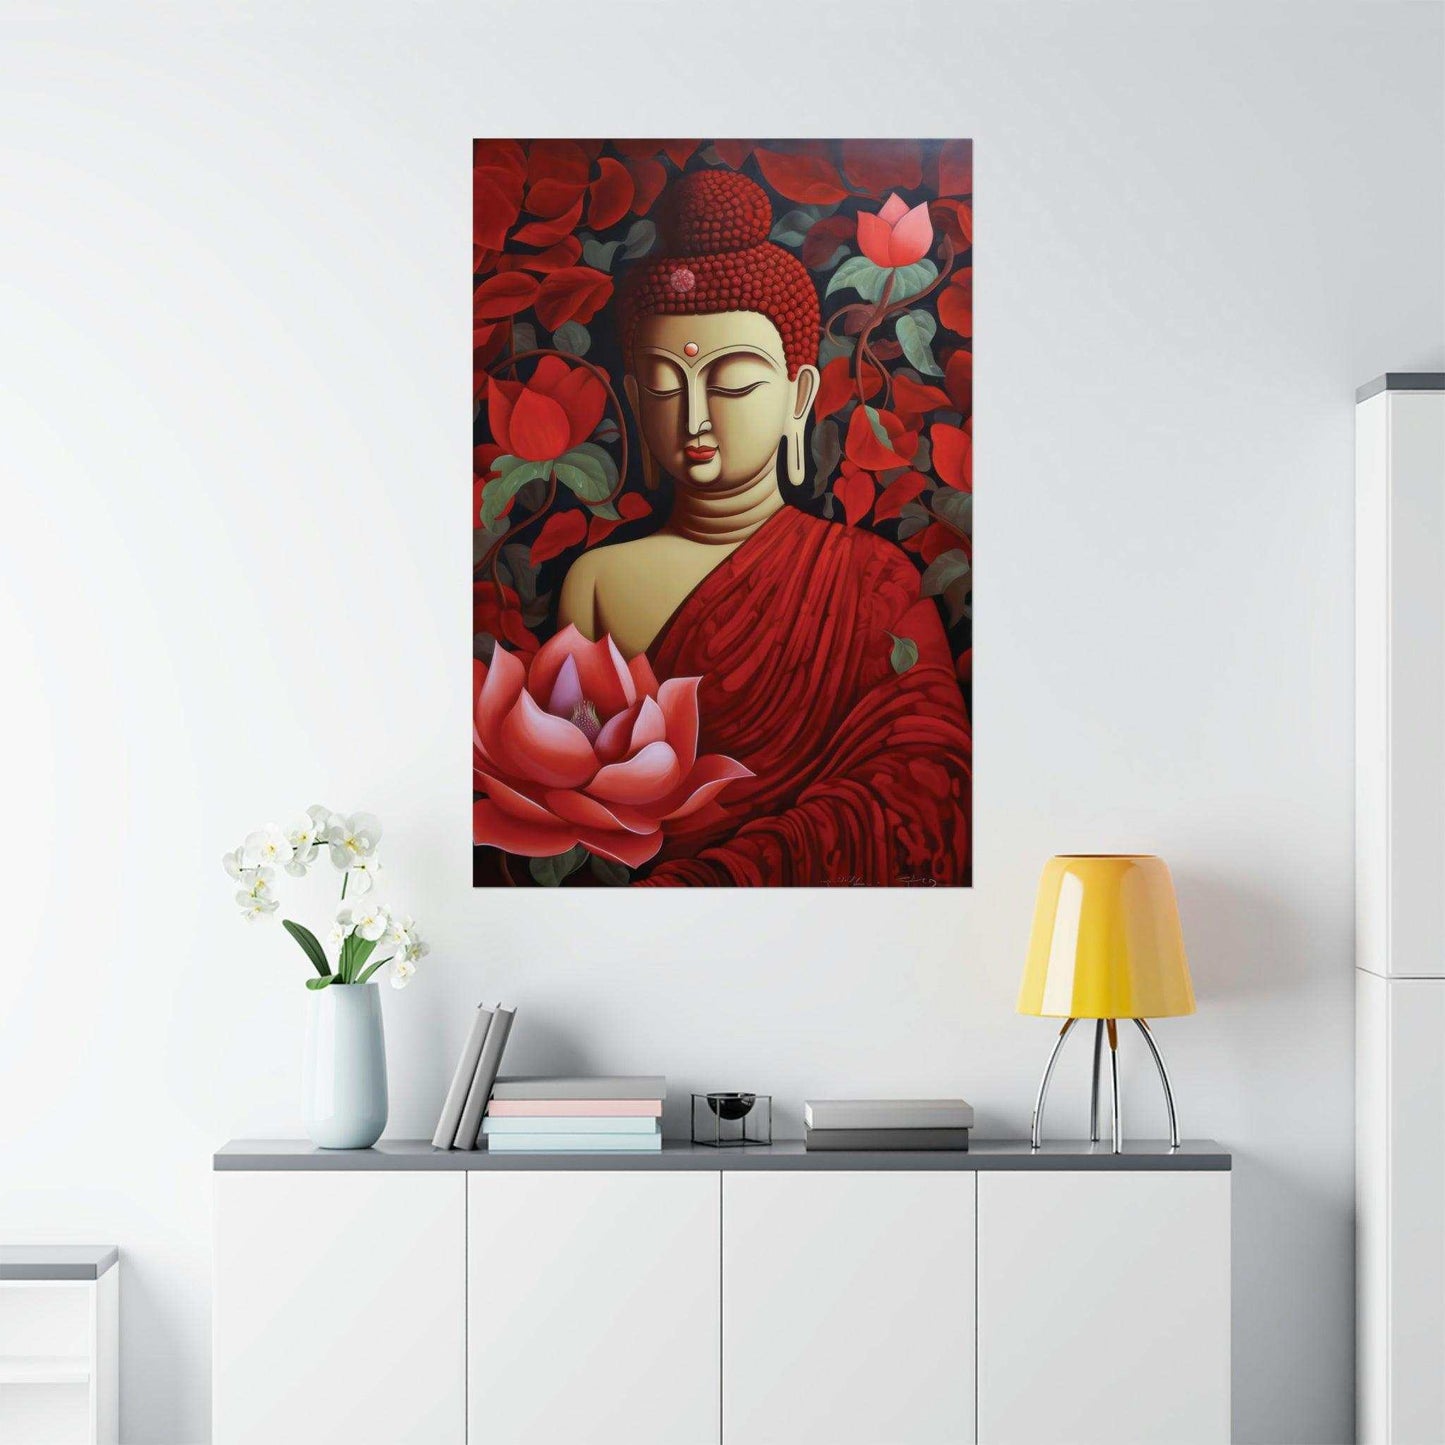 Abstract Red Buddha painting from ZenArtBliss.com, showcasing a sitting Buddha amid vibrant red flowers, printed on matte paper.